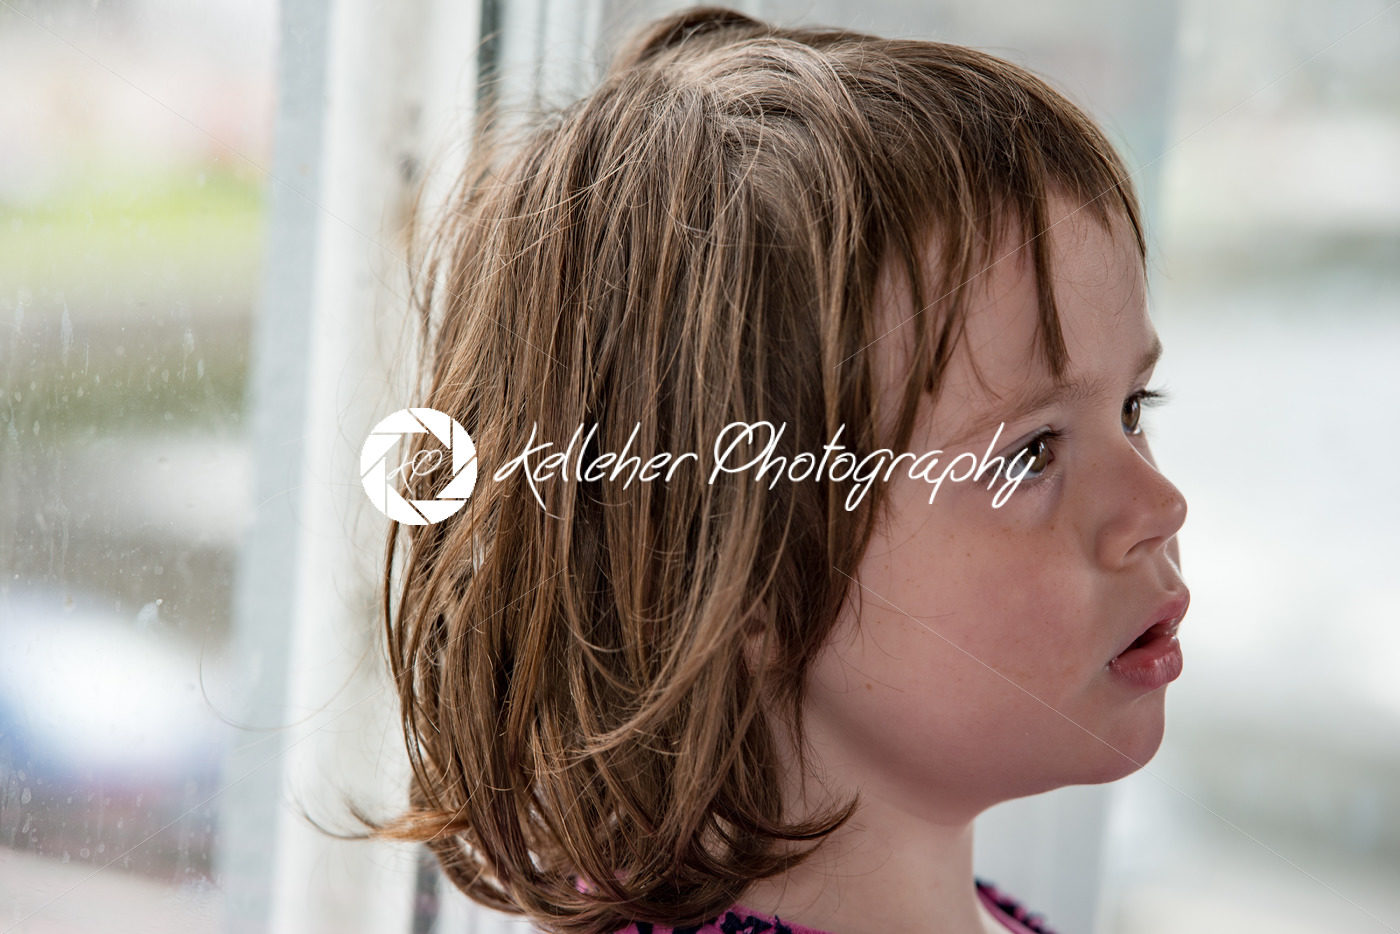 Young little girl portrait looking out window - Kelleher Photography Store